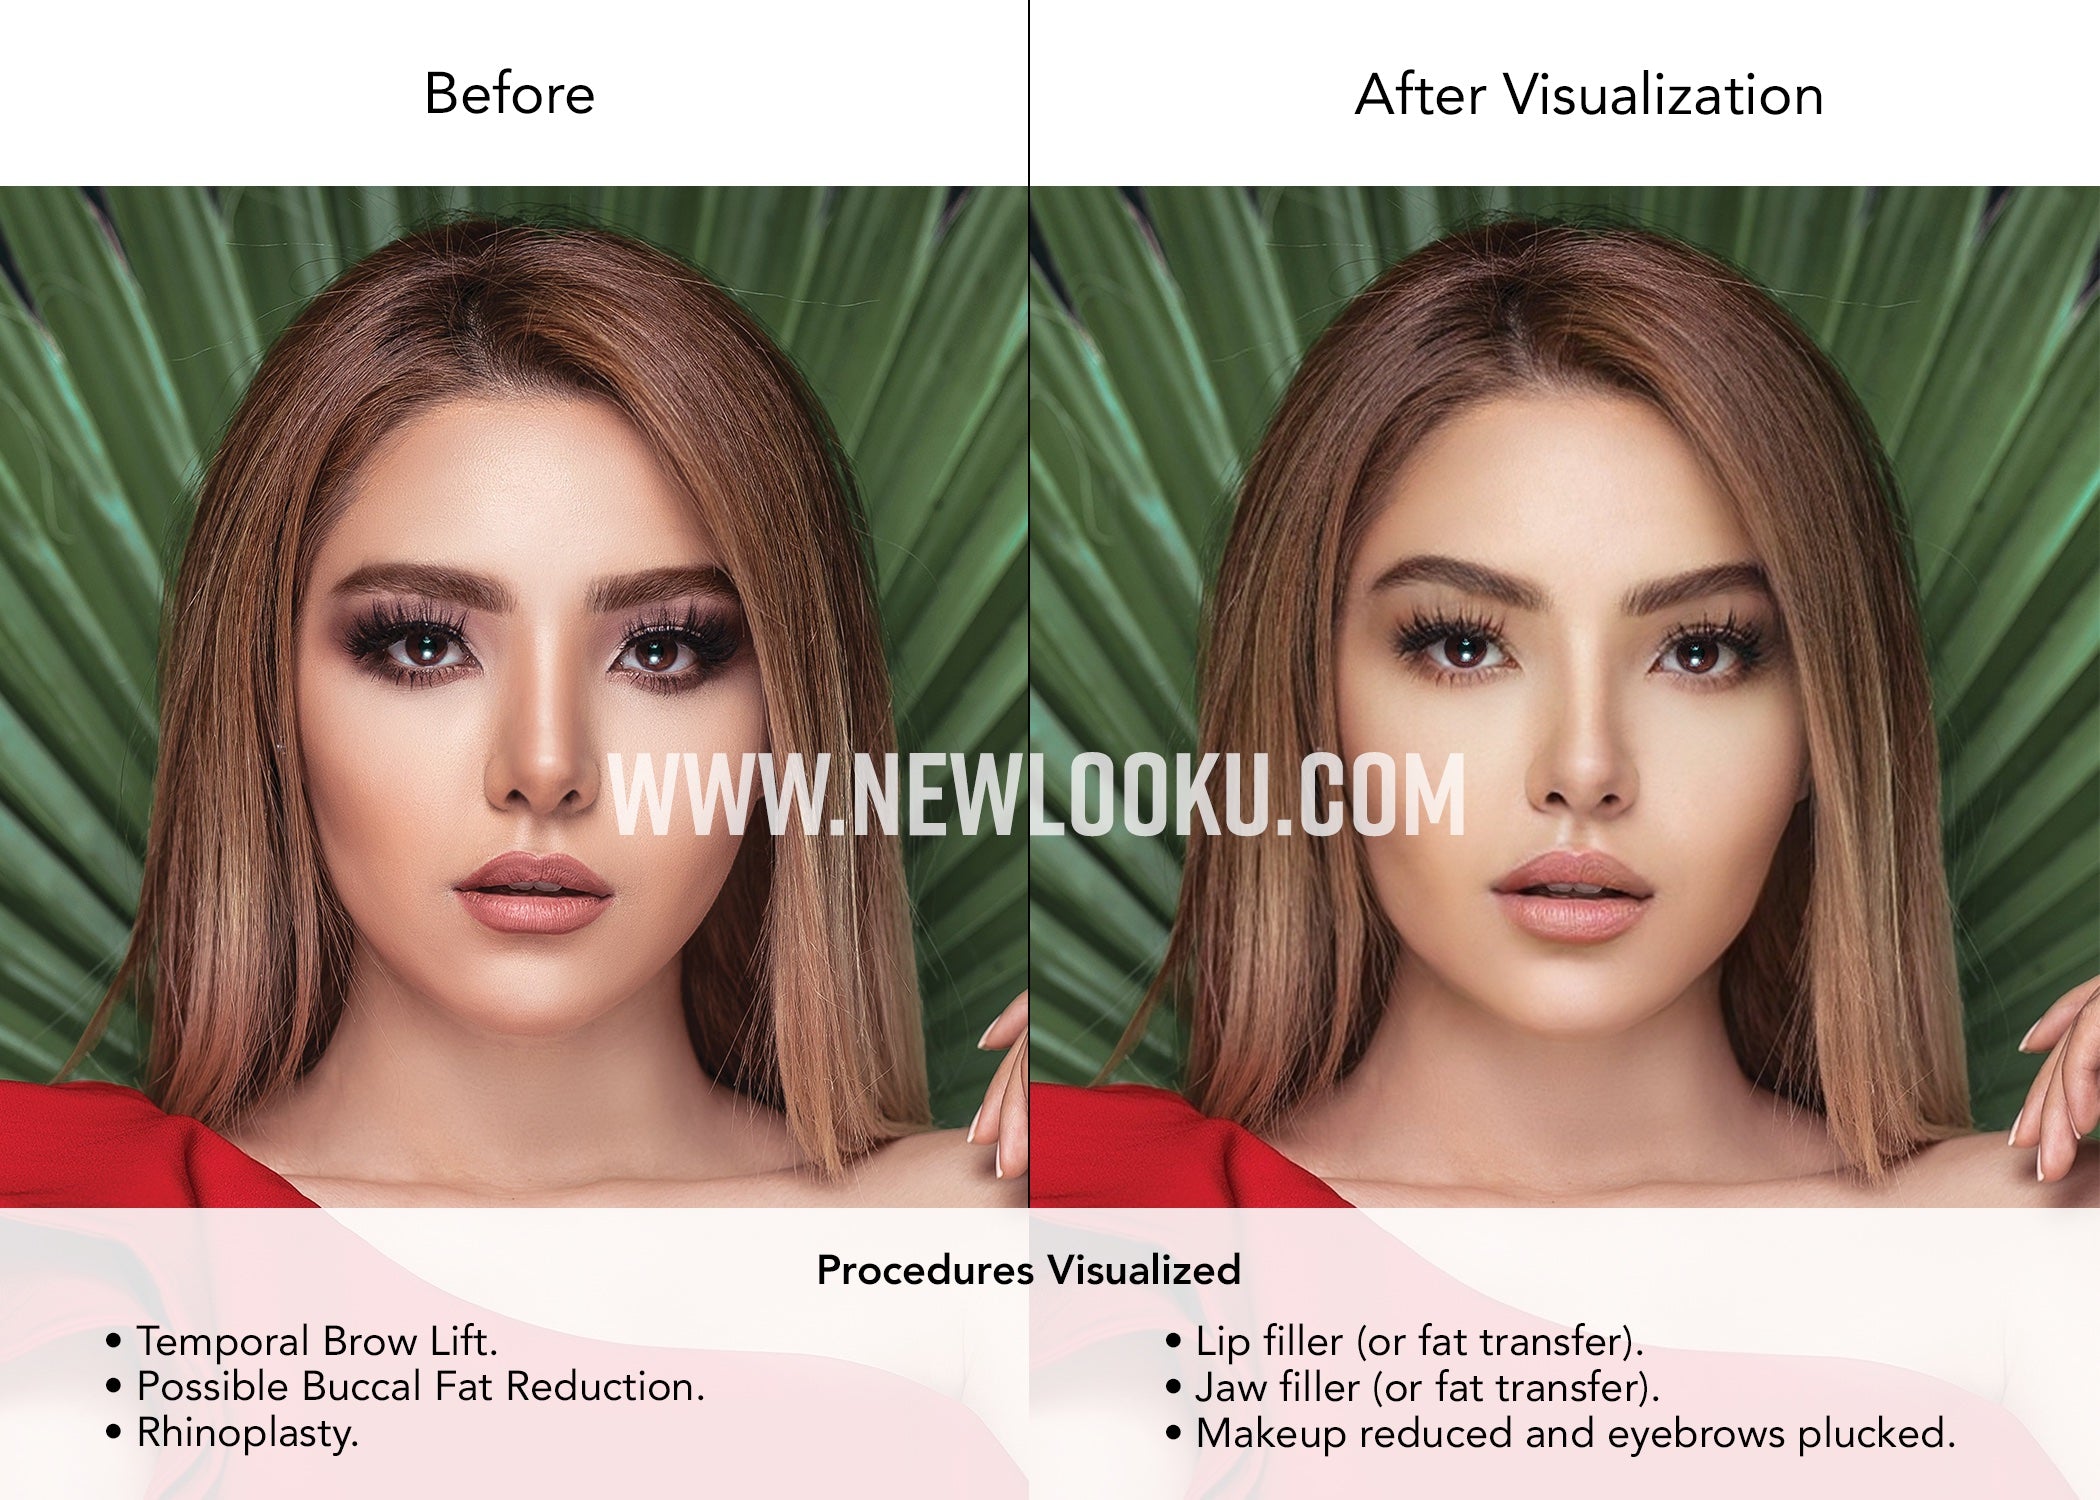 Asian Female Plastic Surgery Visualization Before and After: Temporal Brow Lift. Buccal fat reduction. Rhinoplasty. Lip and jaw filler (or fat transfer). 